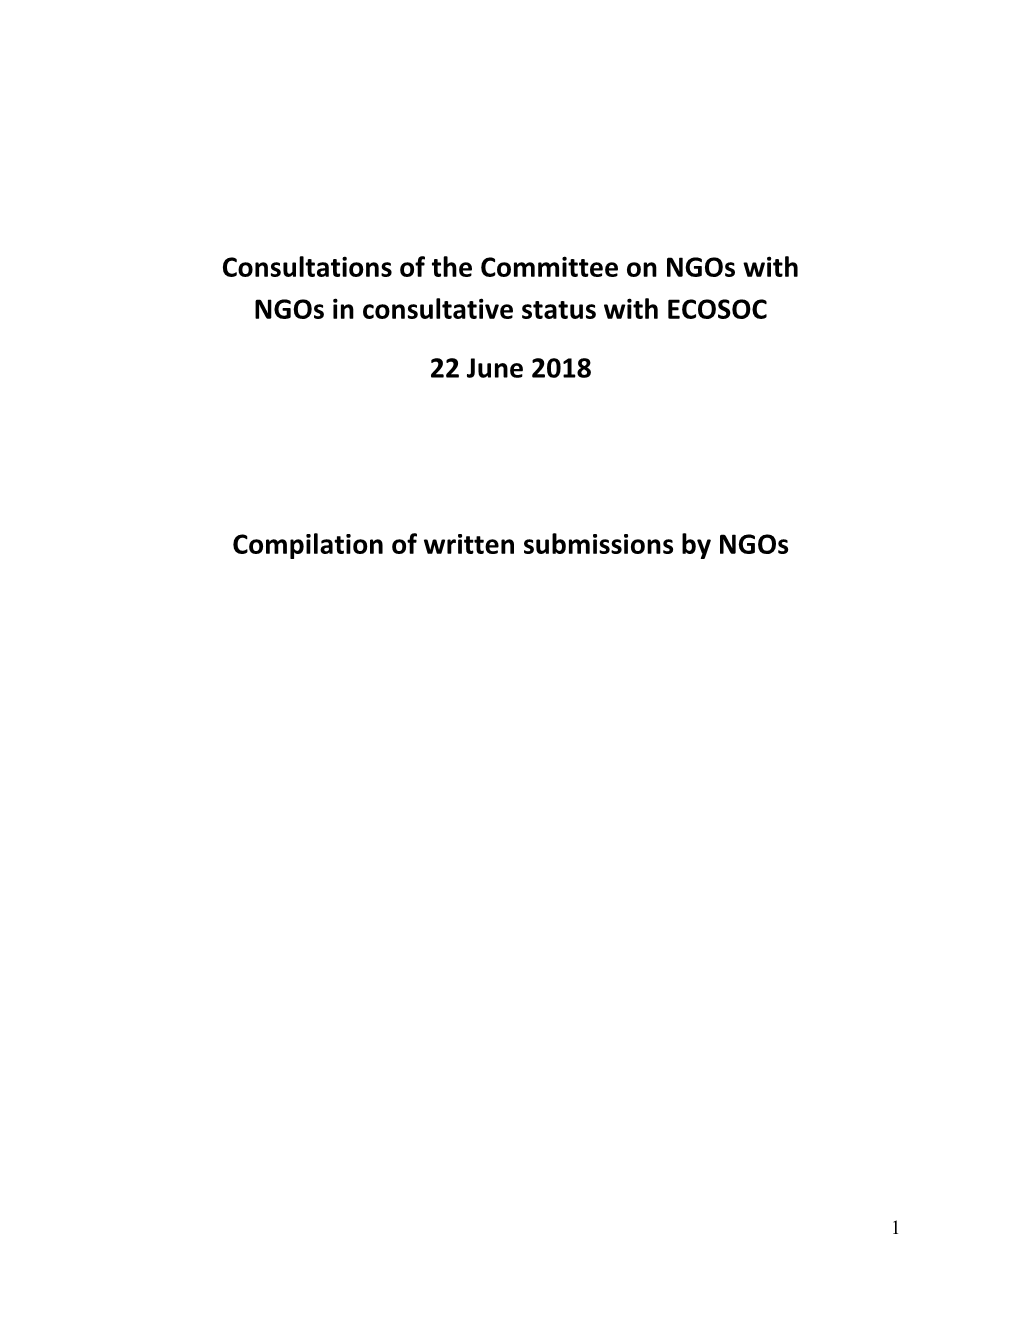 Consultations of the Committee on Ngos with Ngos in Consultative Status with ECOSOC 22 June 2018 Compilation of Written Subm